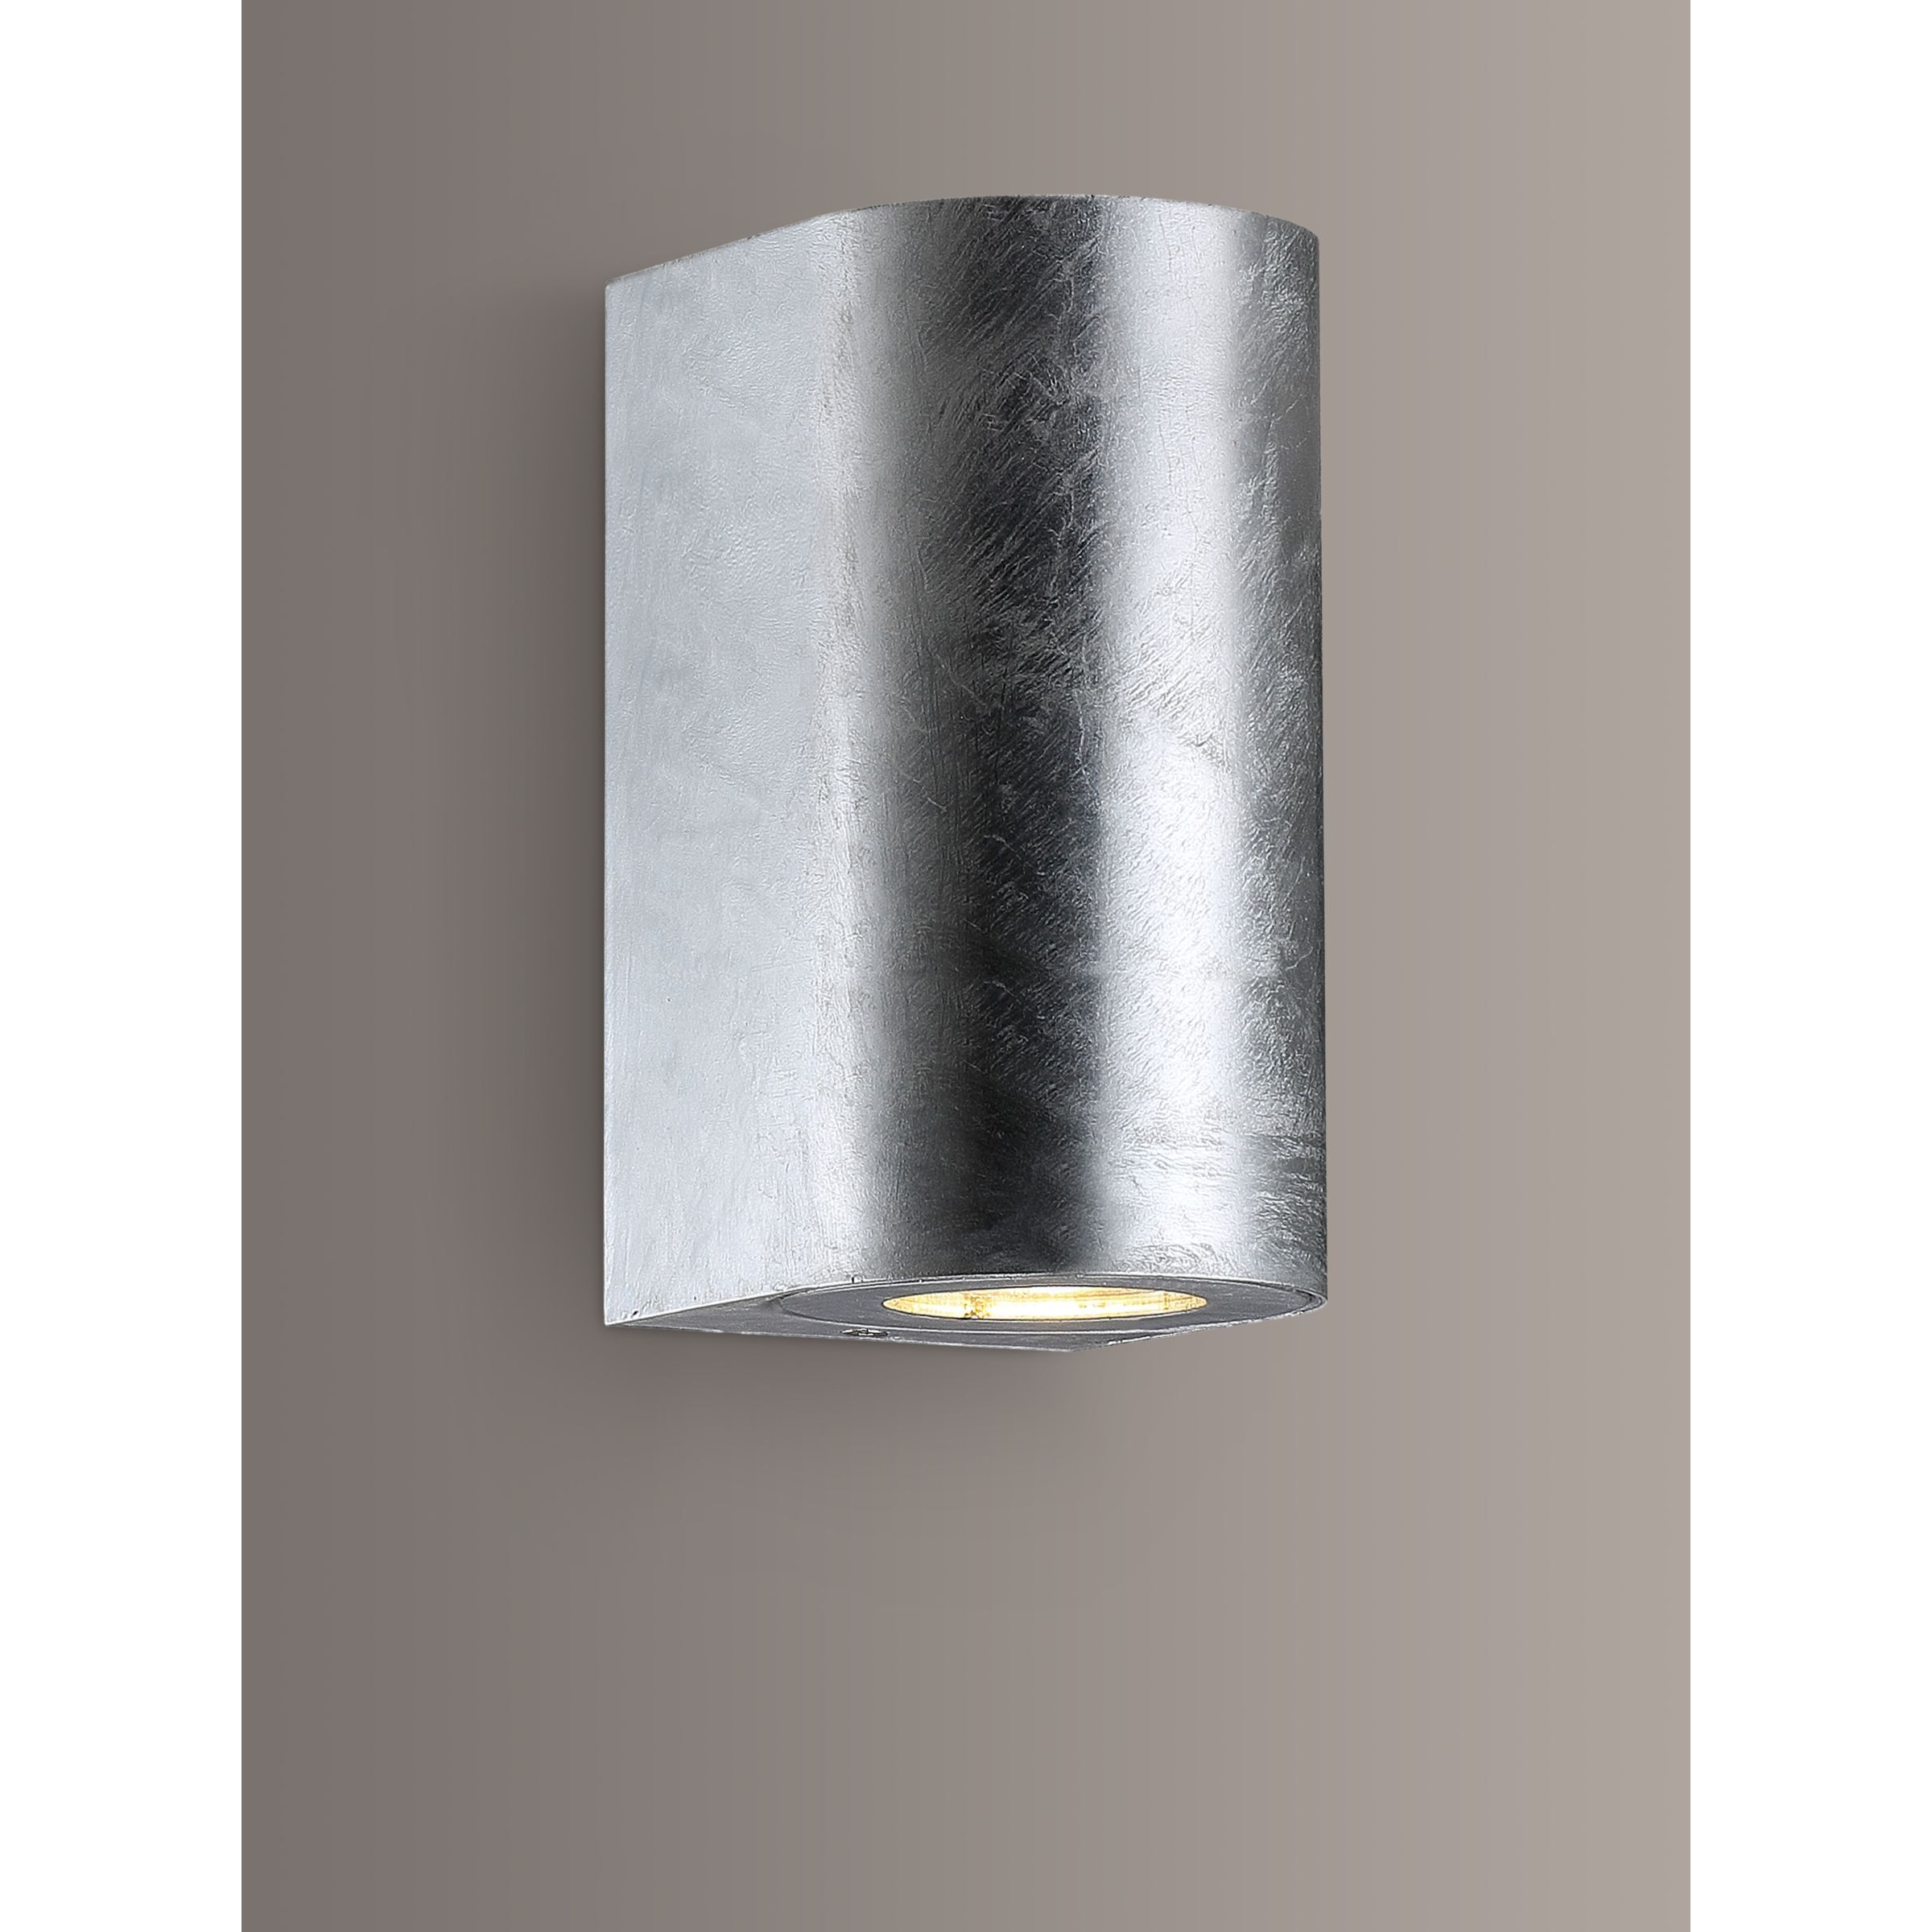 Nordlux Canto Max 2.0 Indoor / Outdoor Wall Light - image 1